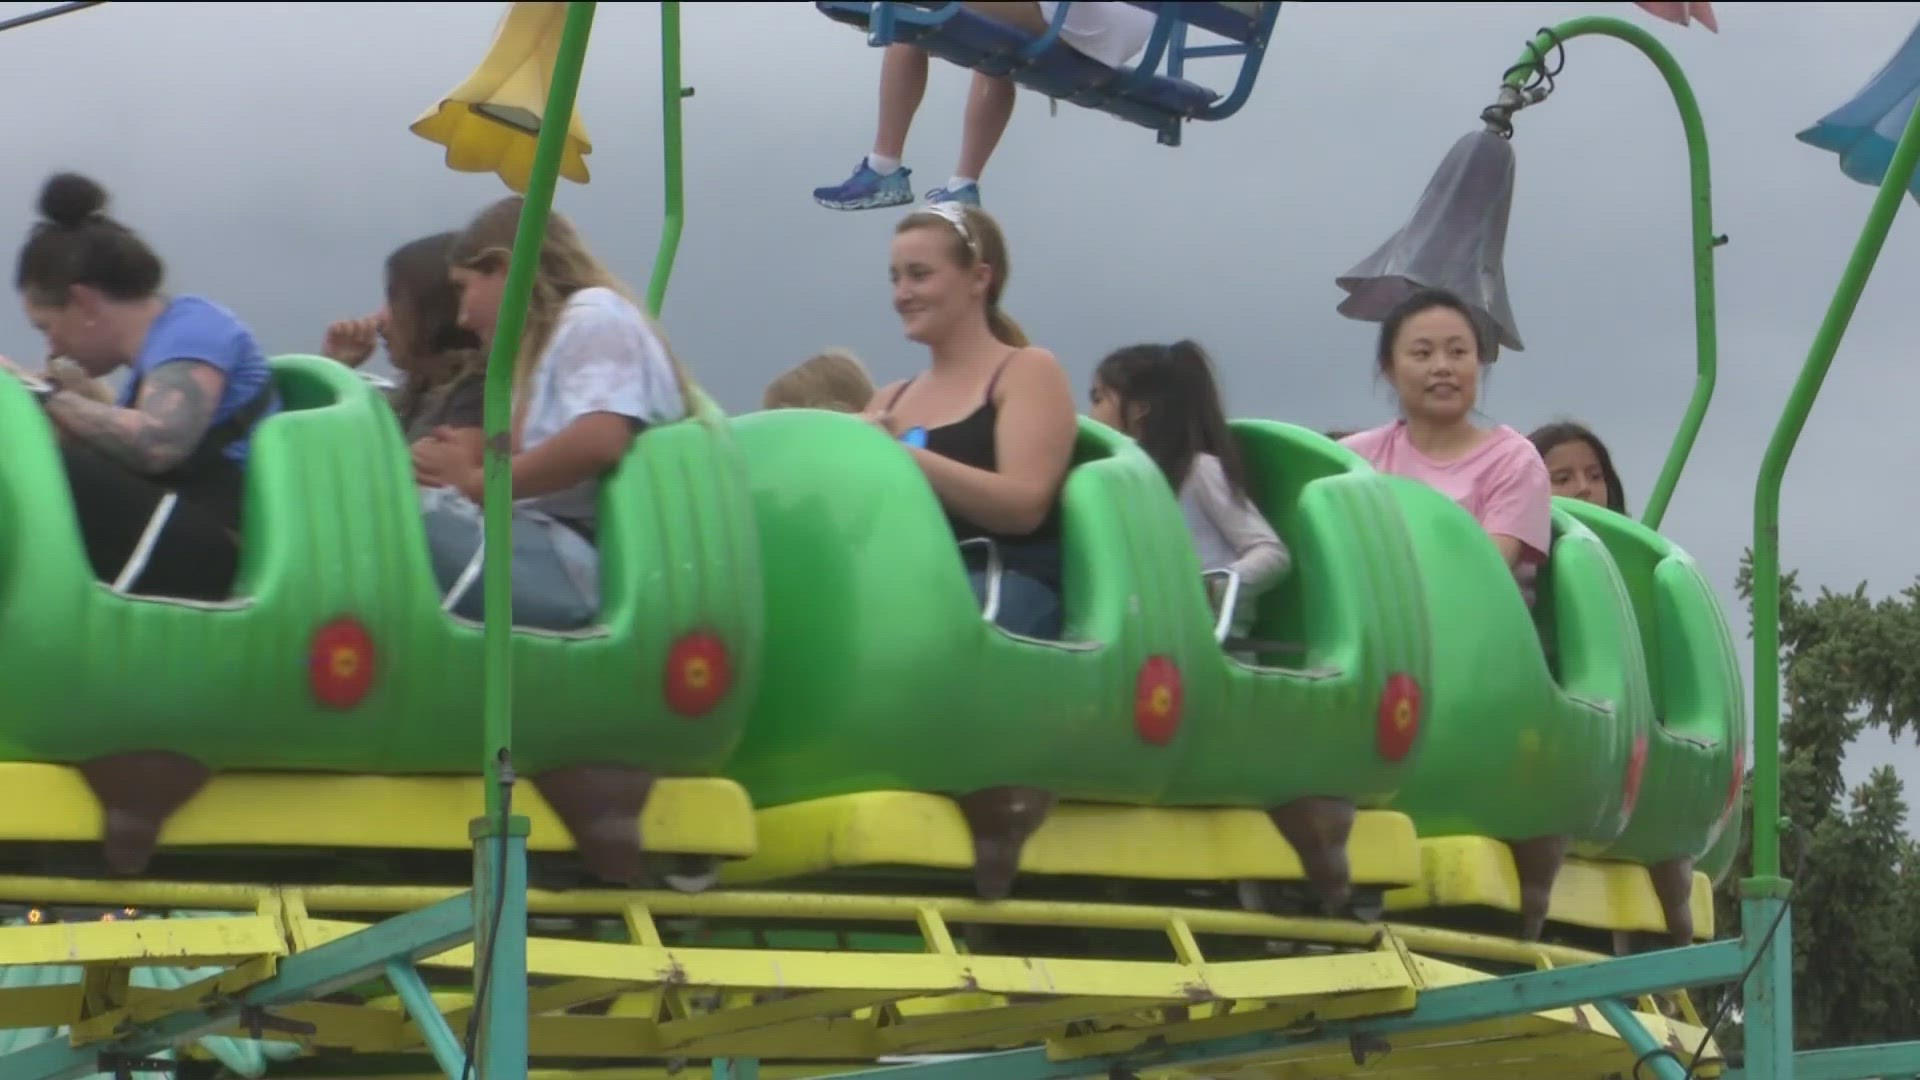 Rain is in the forecast from Tropical Storm Hilary and organizers at the fair are taking precautions.